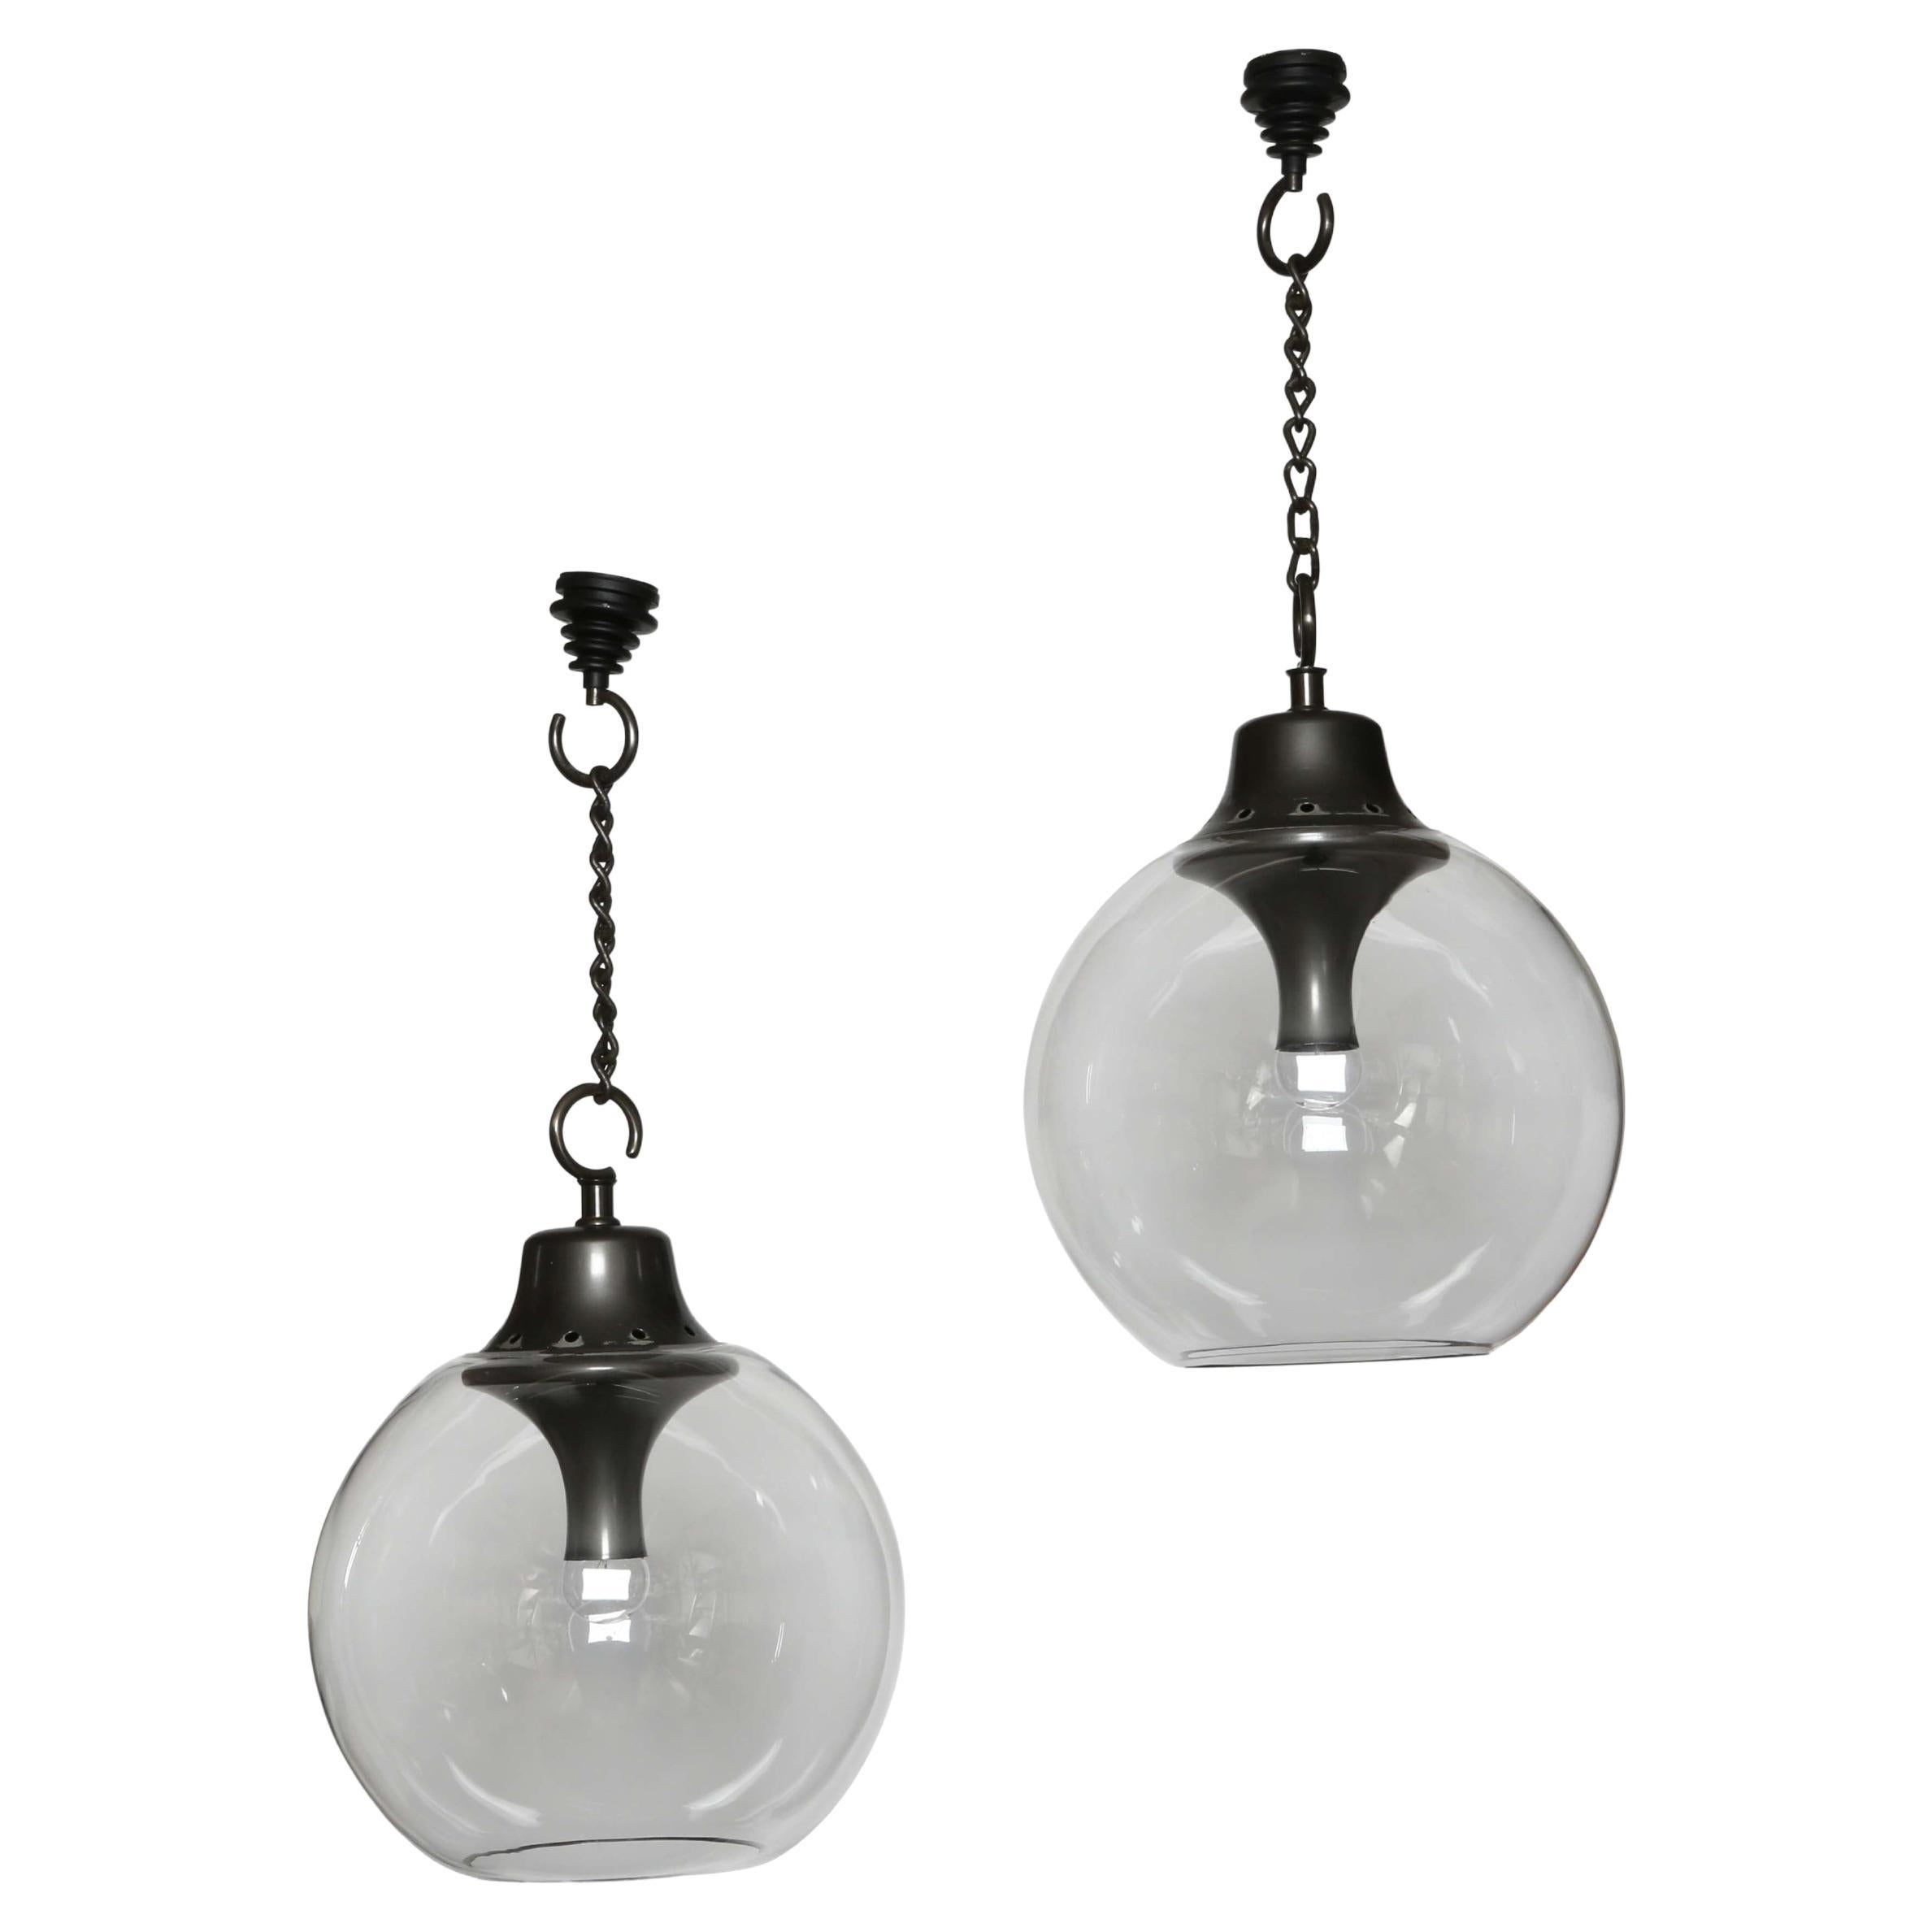 Luigi Caccia Dominioni for Azucena ceiling suspension light.
Model LS10 Boccia. Designed and manufactured in Italy in 1960s.
Murano glass, patinated aluminum glass holder and steel chain.
Complimentary US rewiring upon request.
Price is for 1